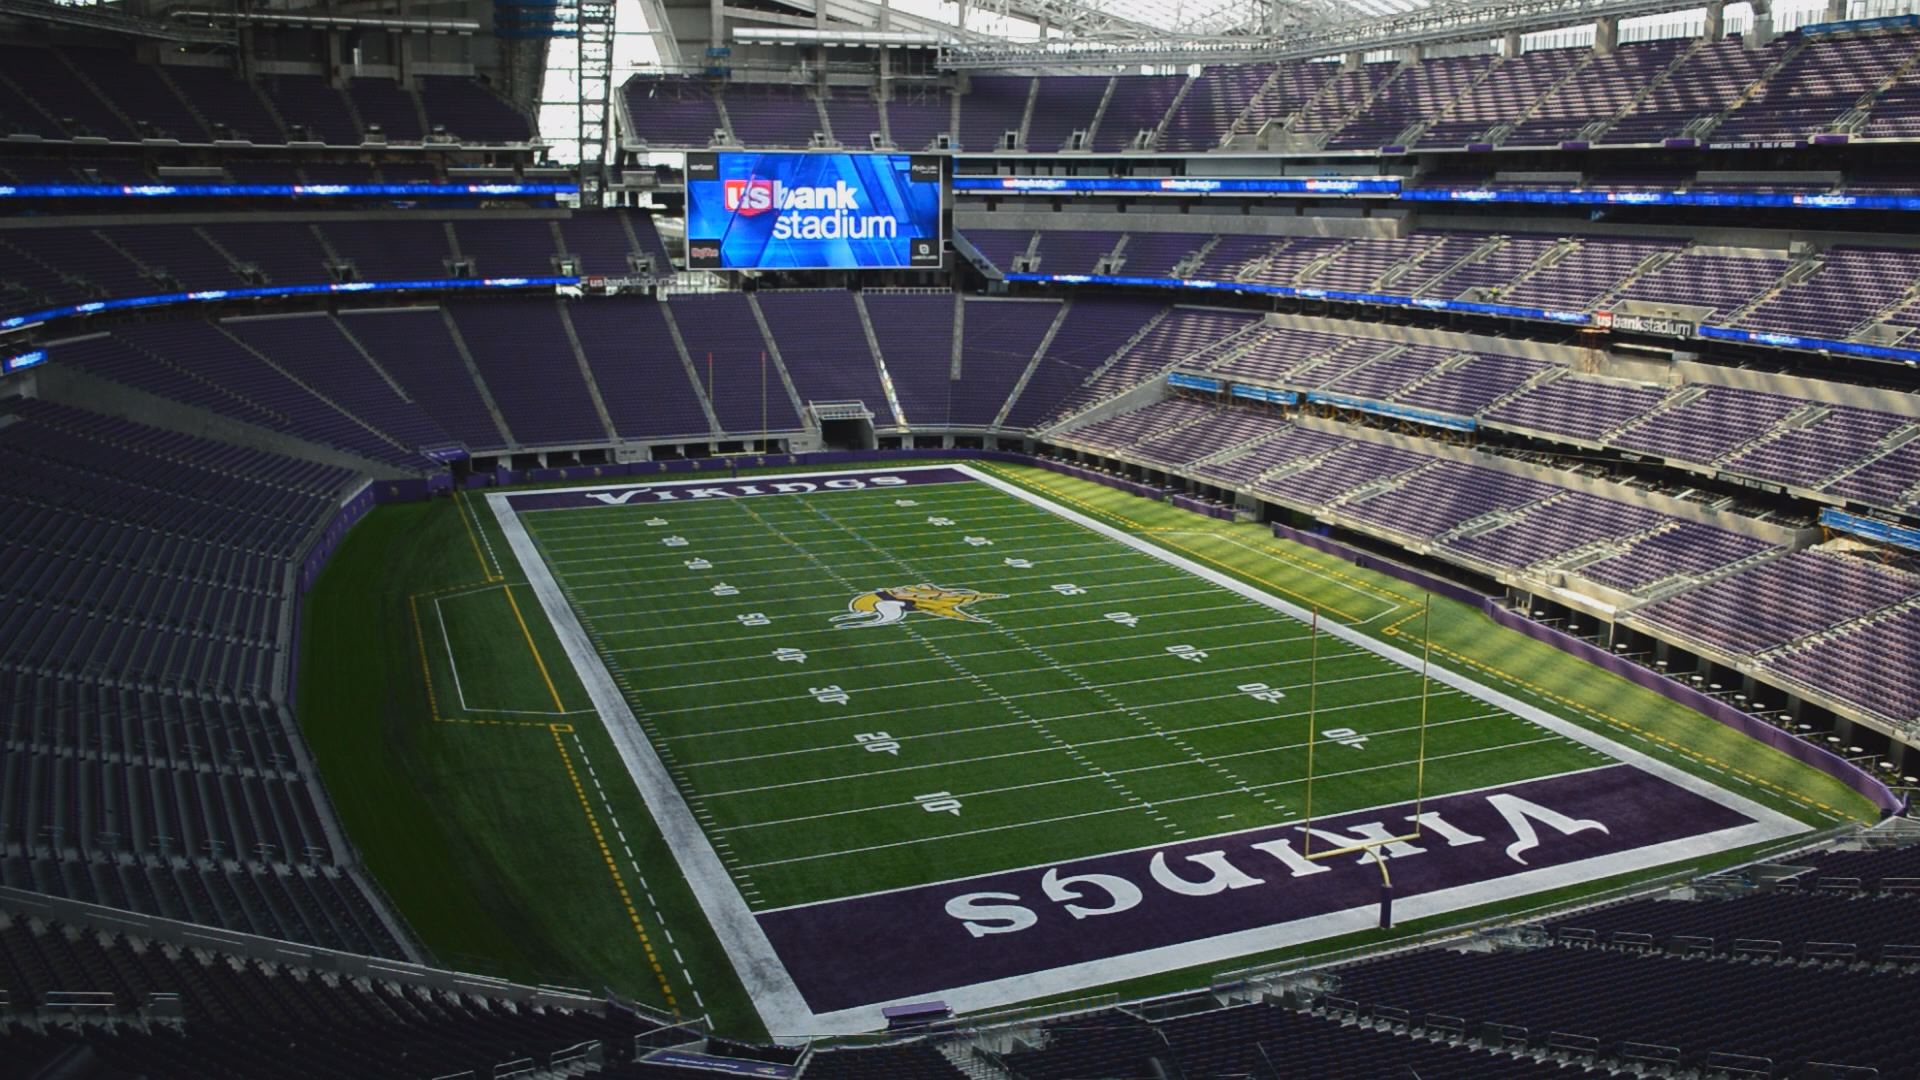 vikings home game tickets